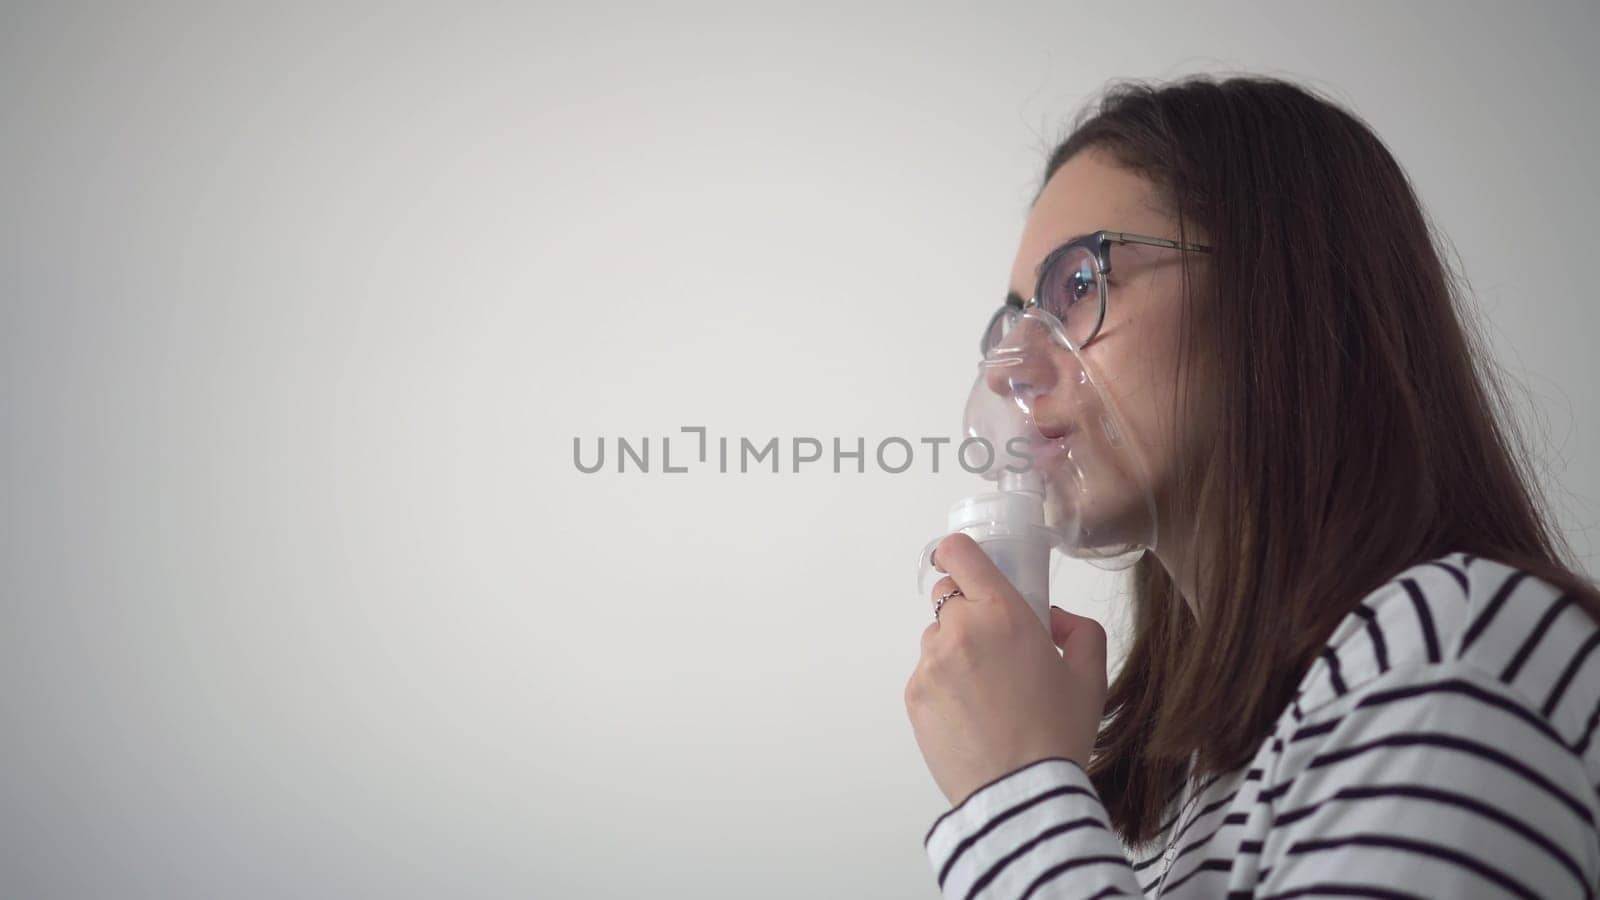 A young woman breathes through an inhaler mask closeup. A girl in glasses with an oxygen mask is being treated for a respiratory infection. 4k